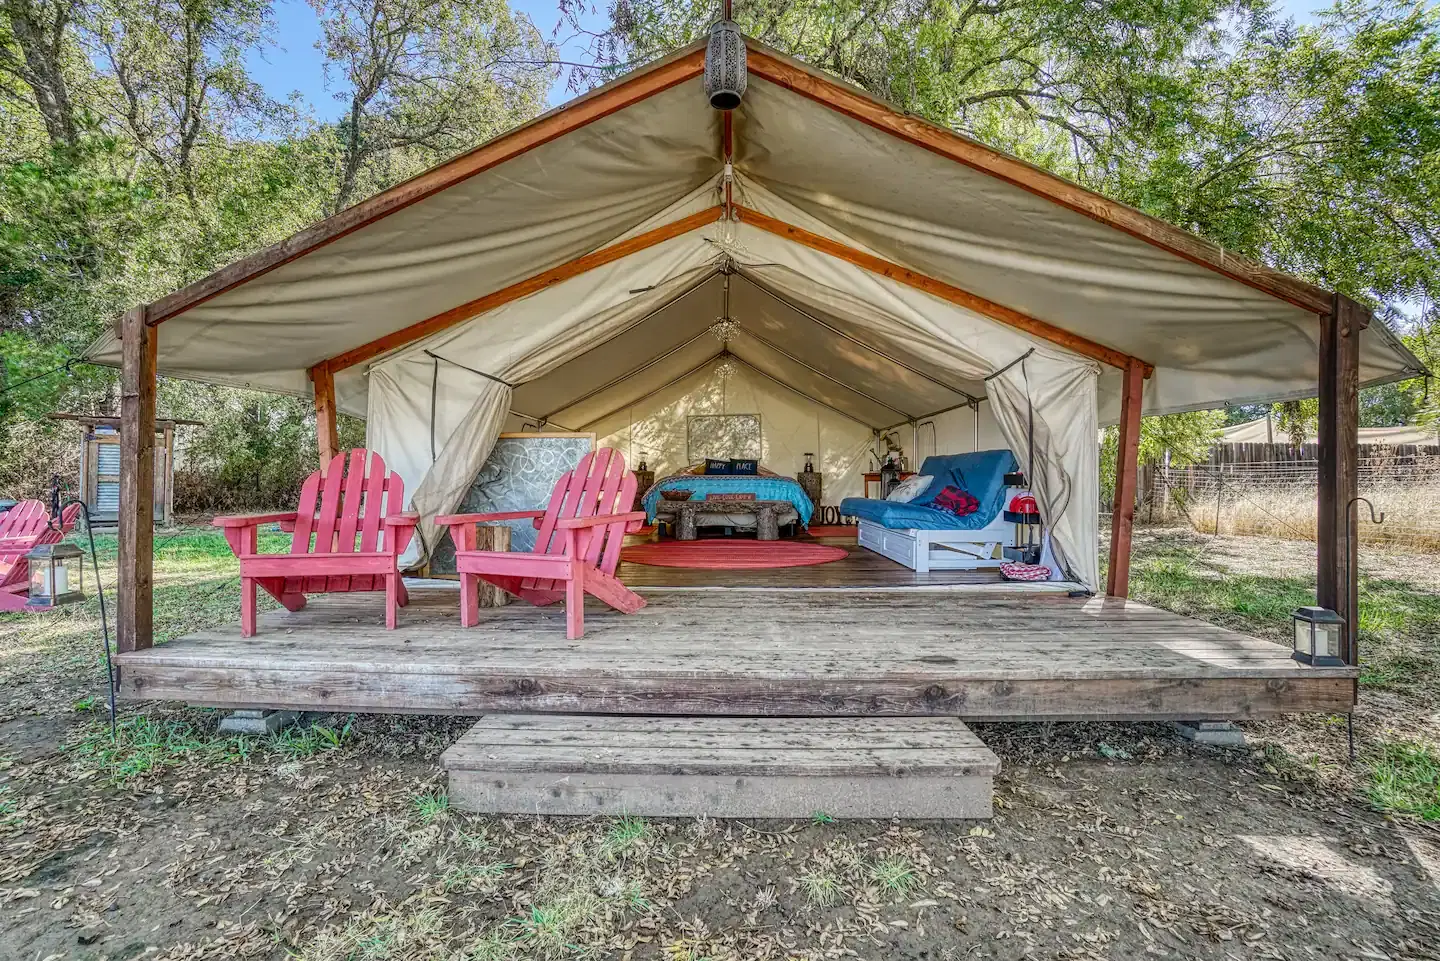 The Glamping Tent